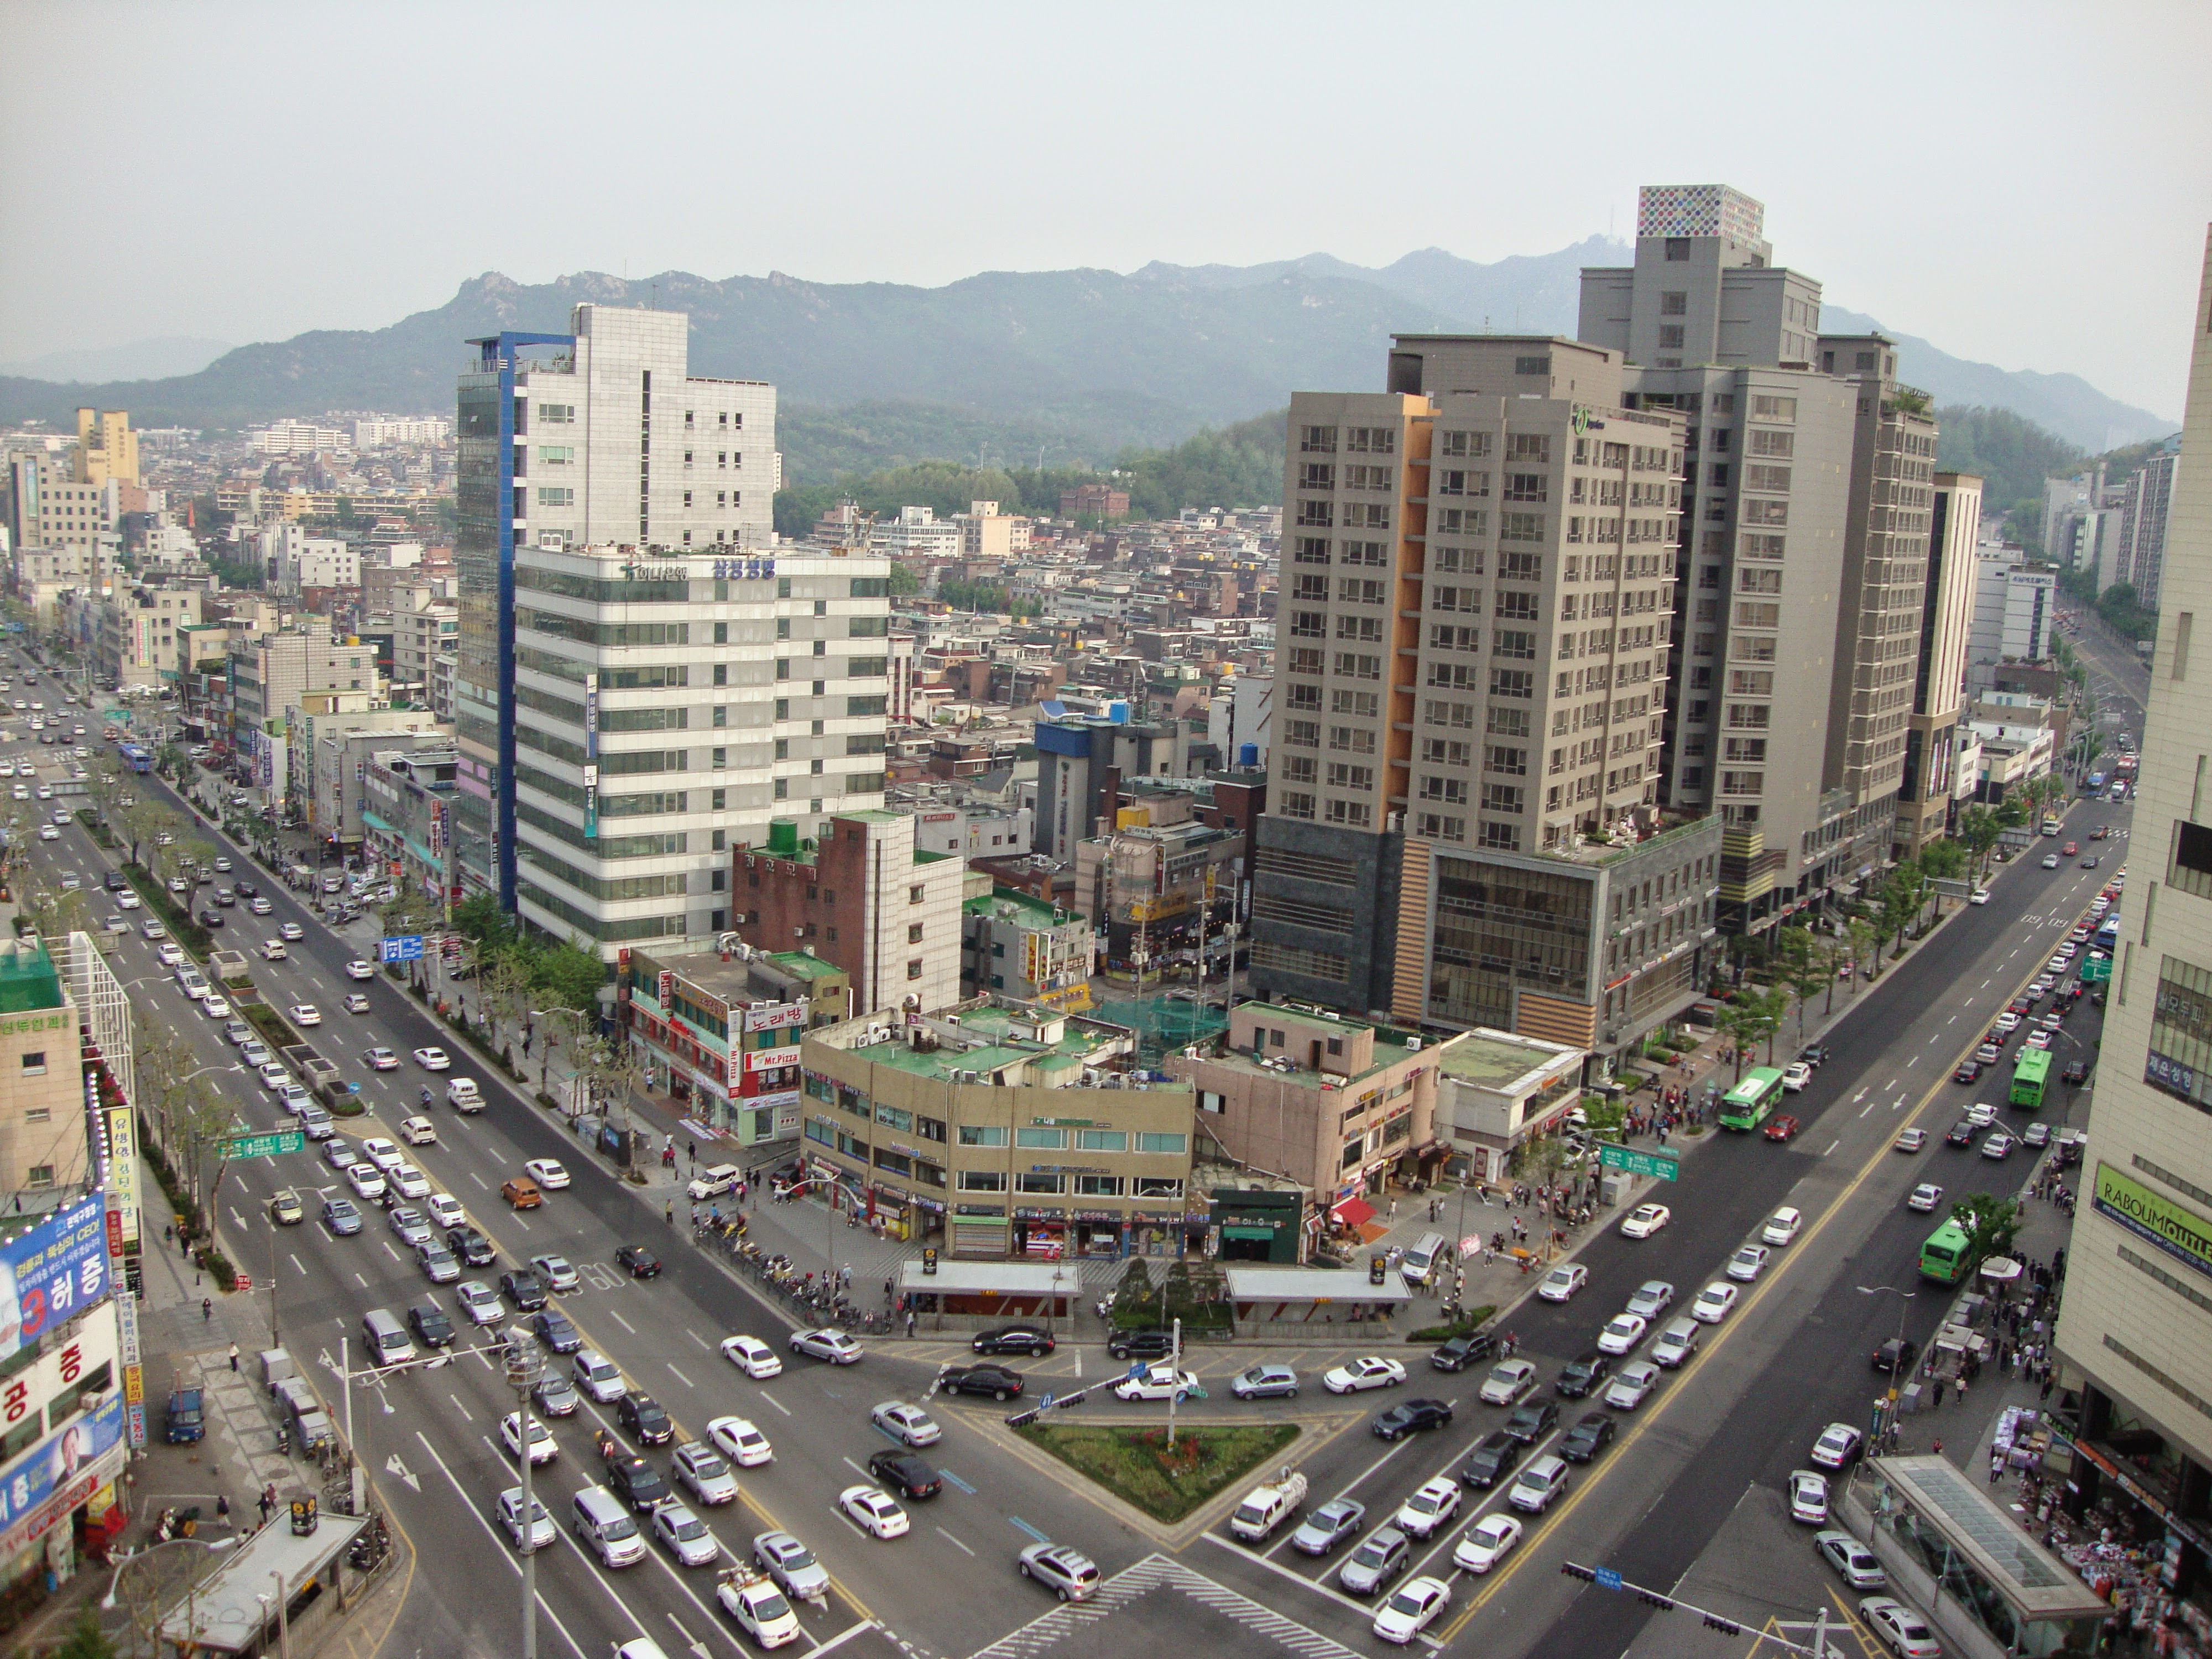 From the roof of the author's apartment building near Seoul National University station, a picture taken in early evening looking south-by-southeast on the intersection at Gwanak-ro & Nambusunhwan-ro.